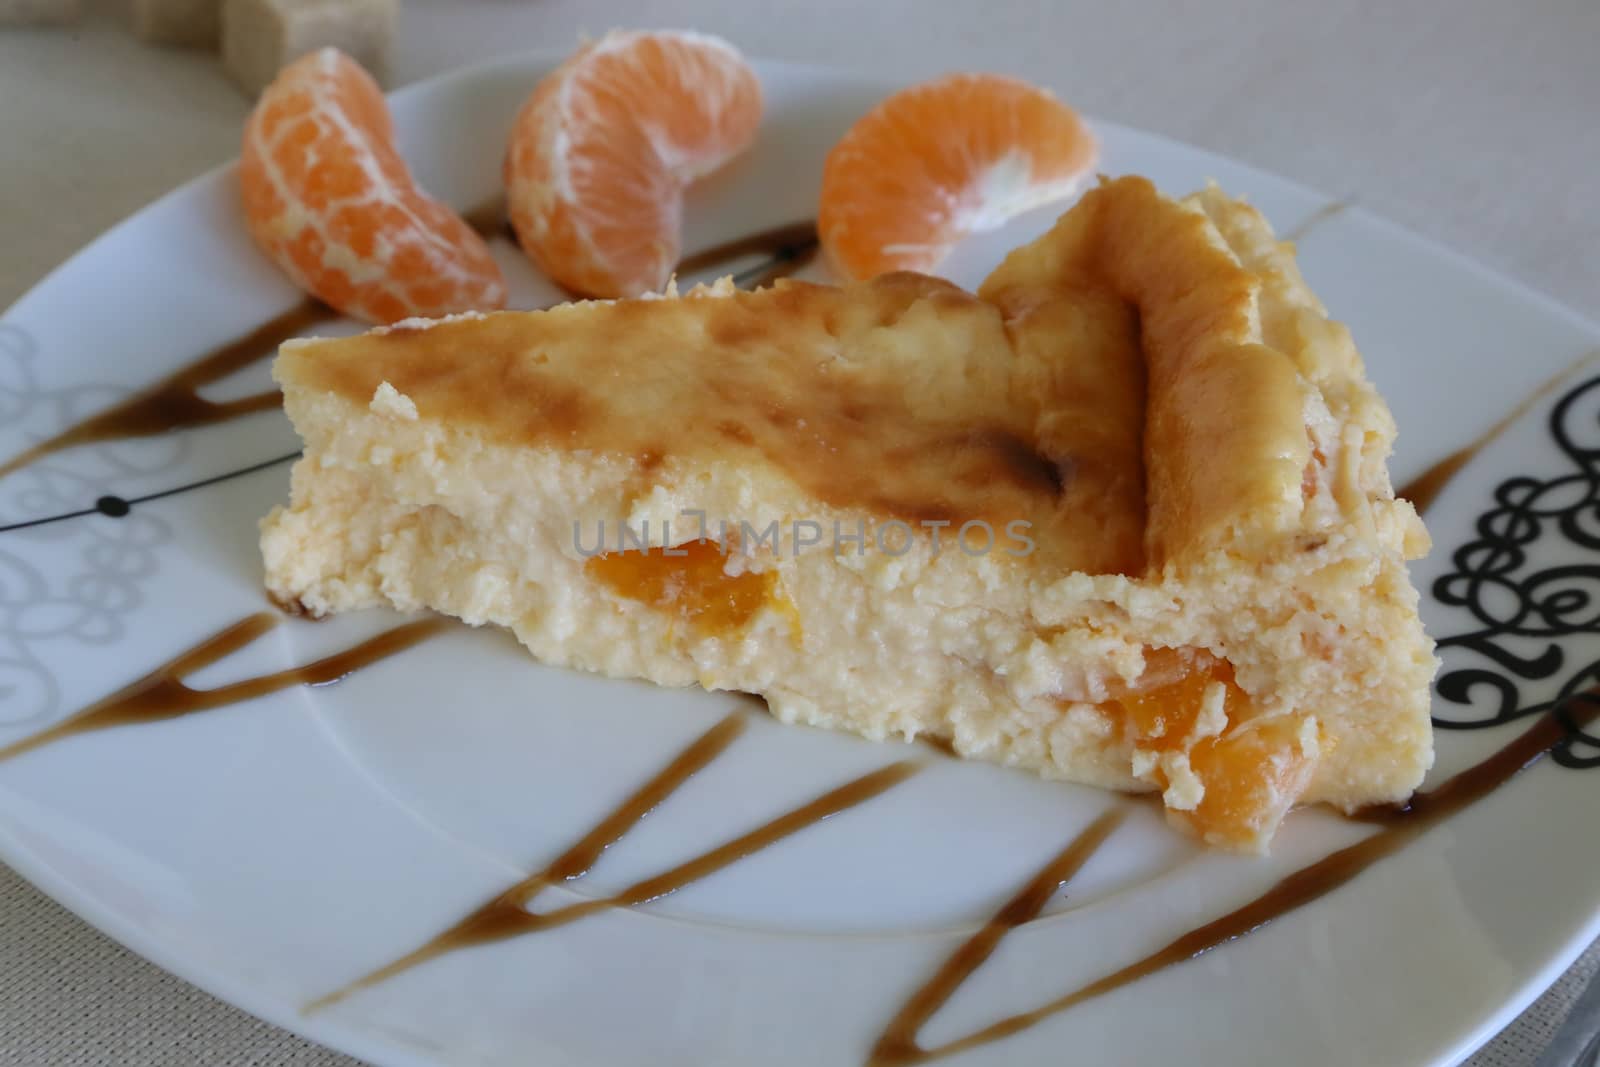 Cheese cake baked from italian ricotta,eggs,sugar,tangerines. The plate is decorated with three cantles of tangerines and caramel toppings